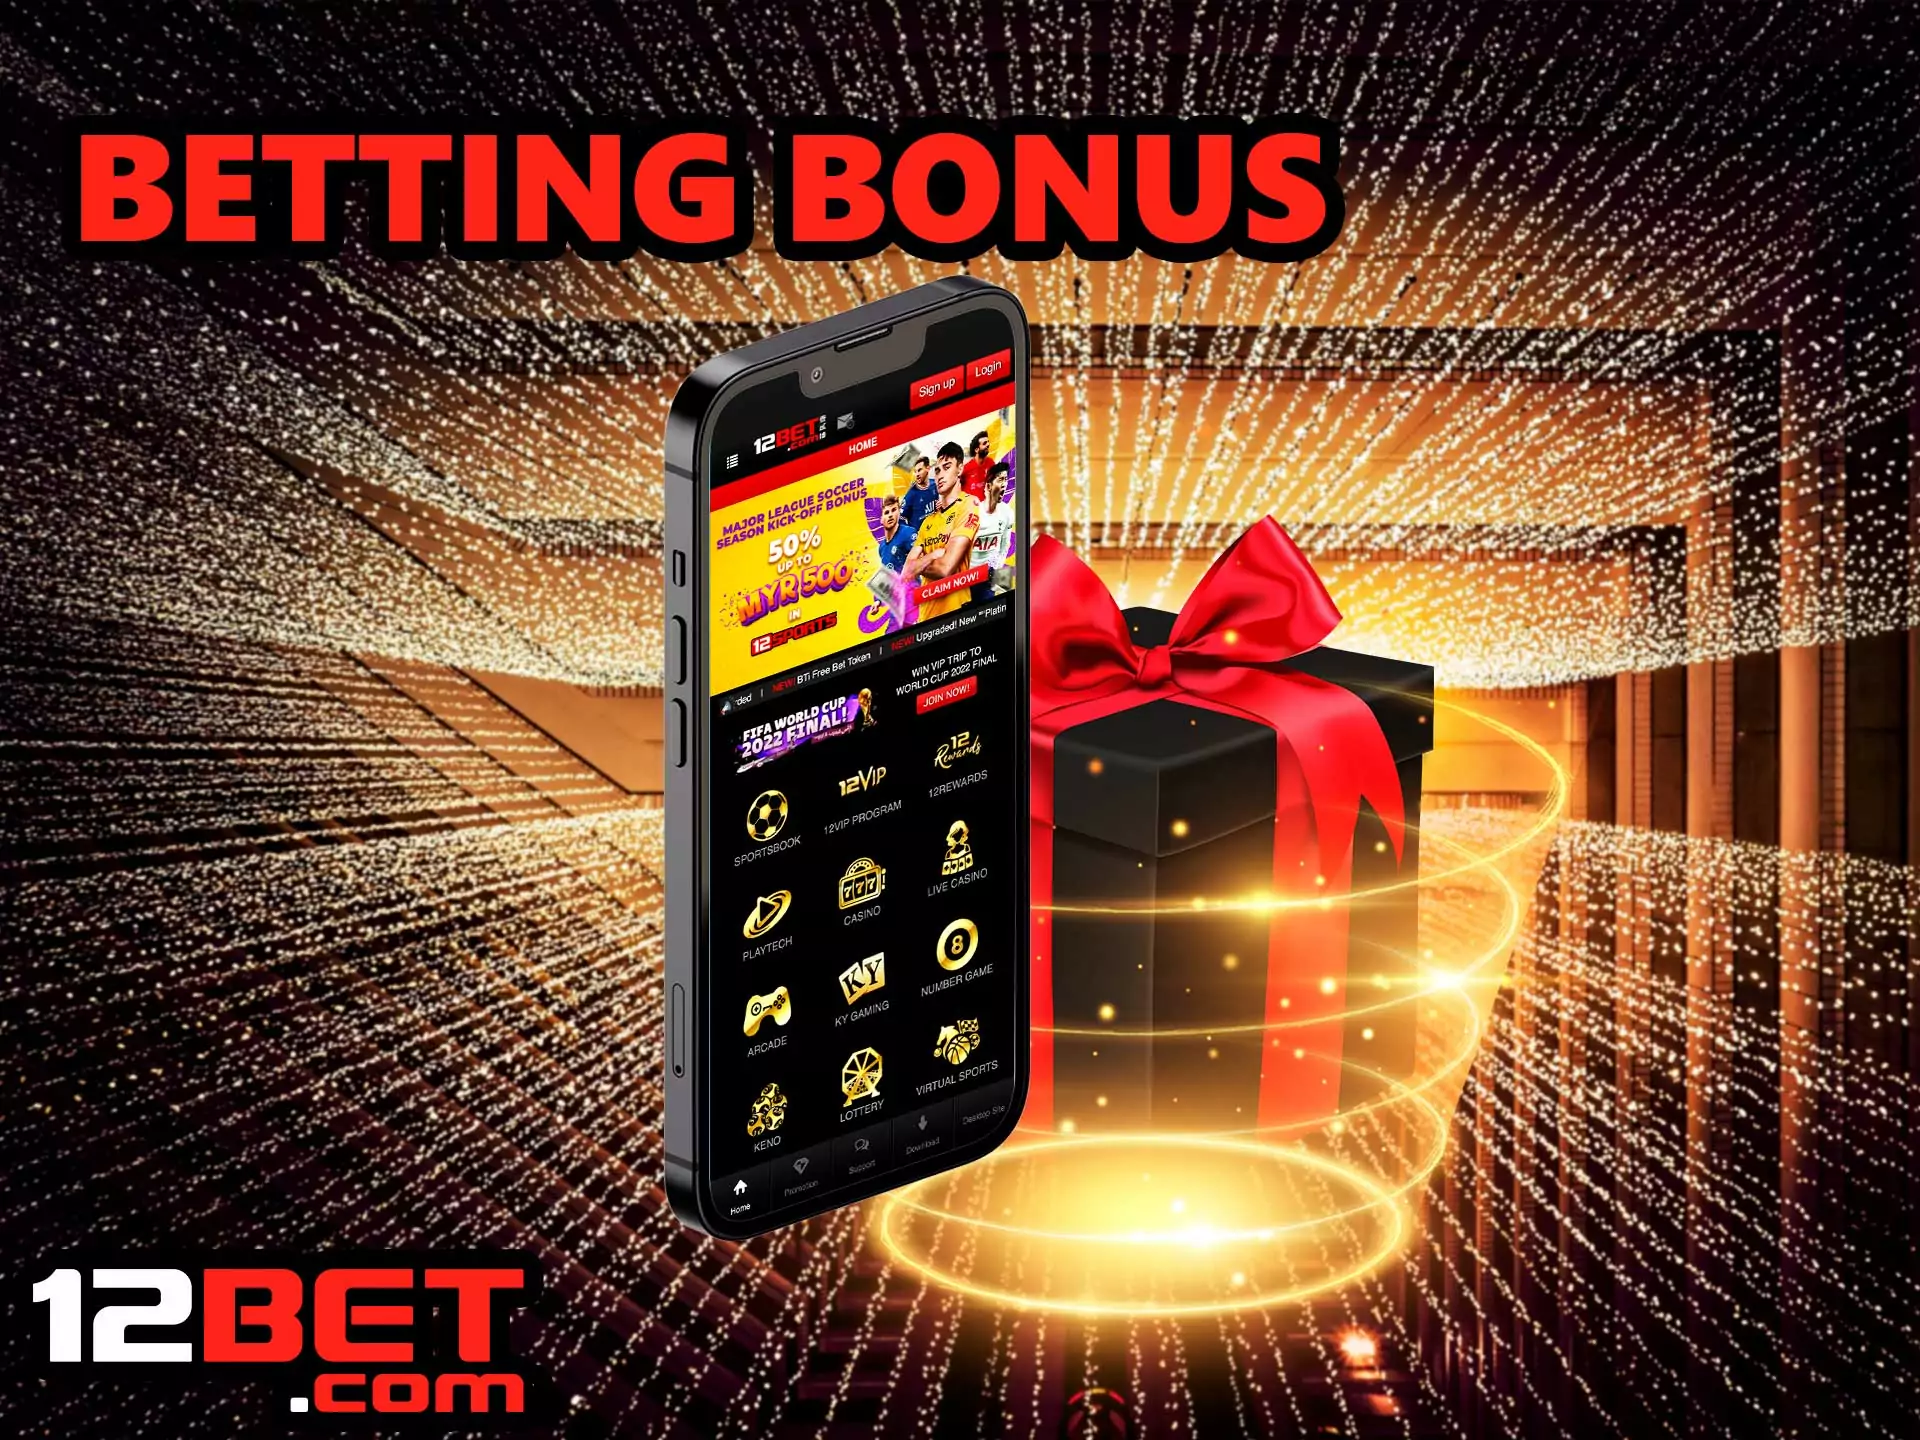 You will find several betting options at once, the most popular is 100% up to 6000 Indian rupees, it is used quite often by players from India.